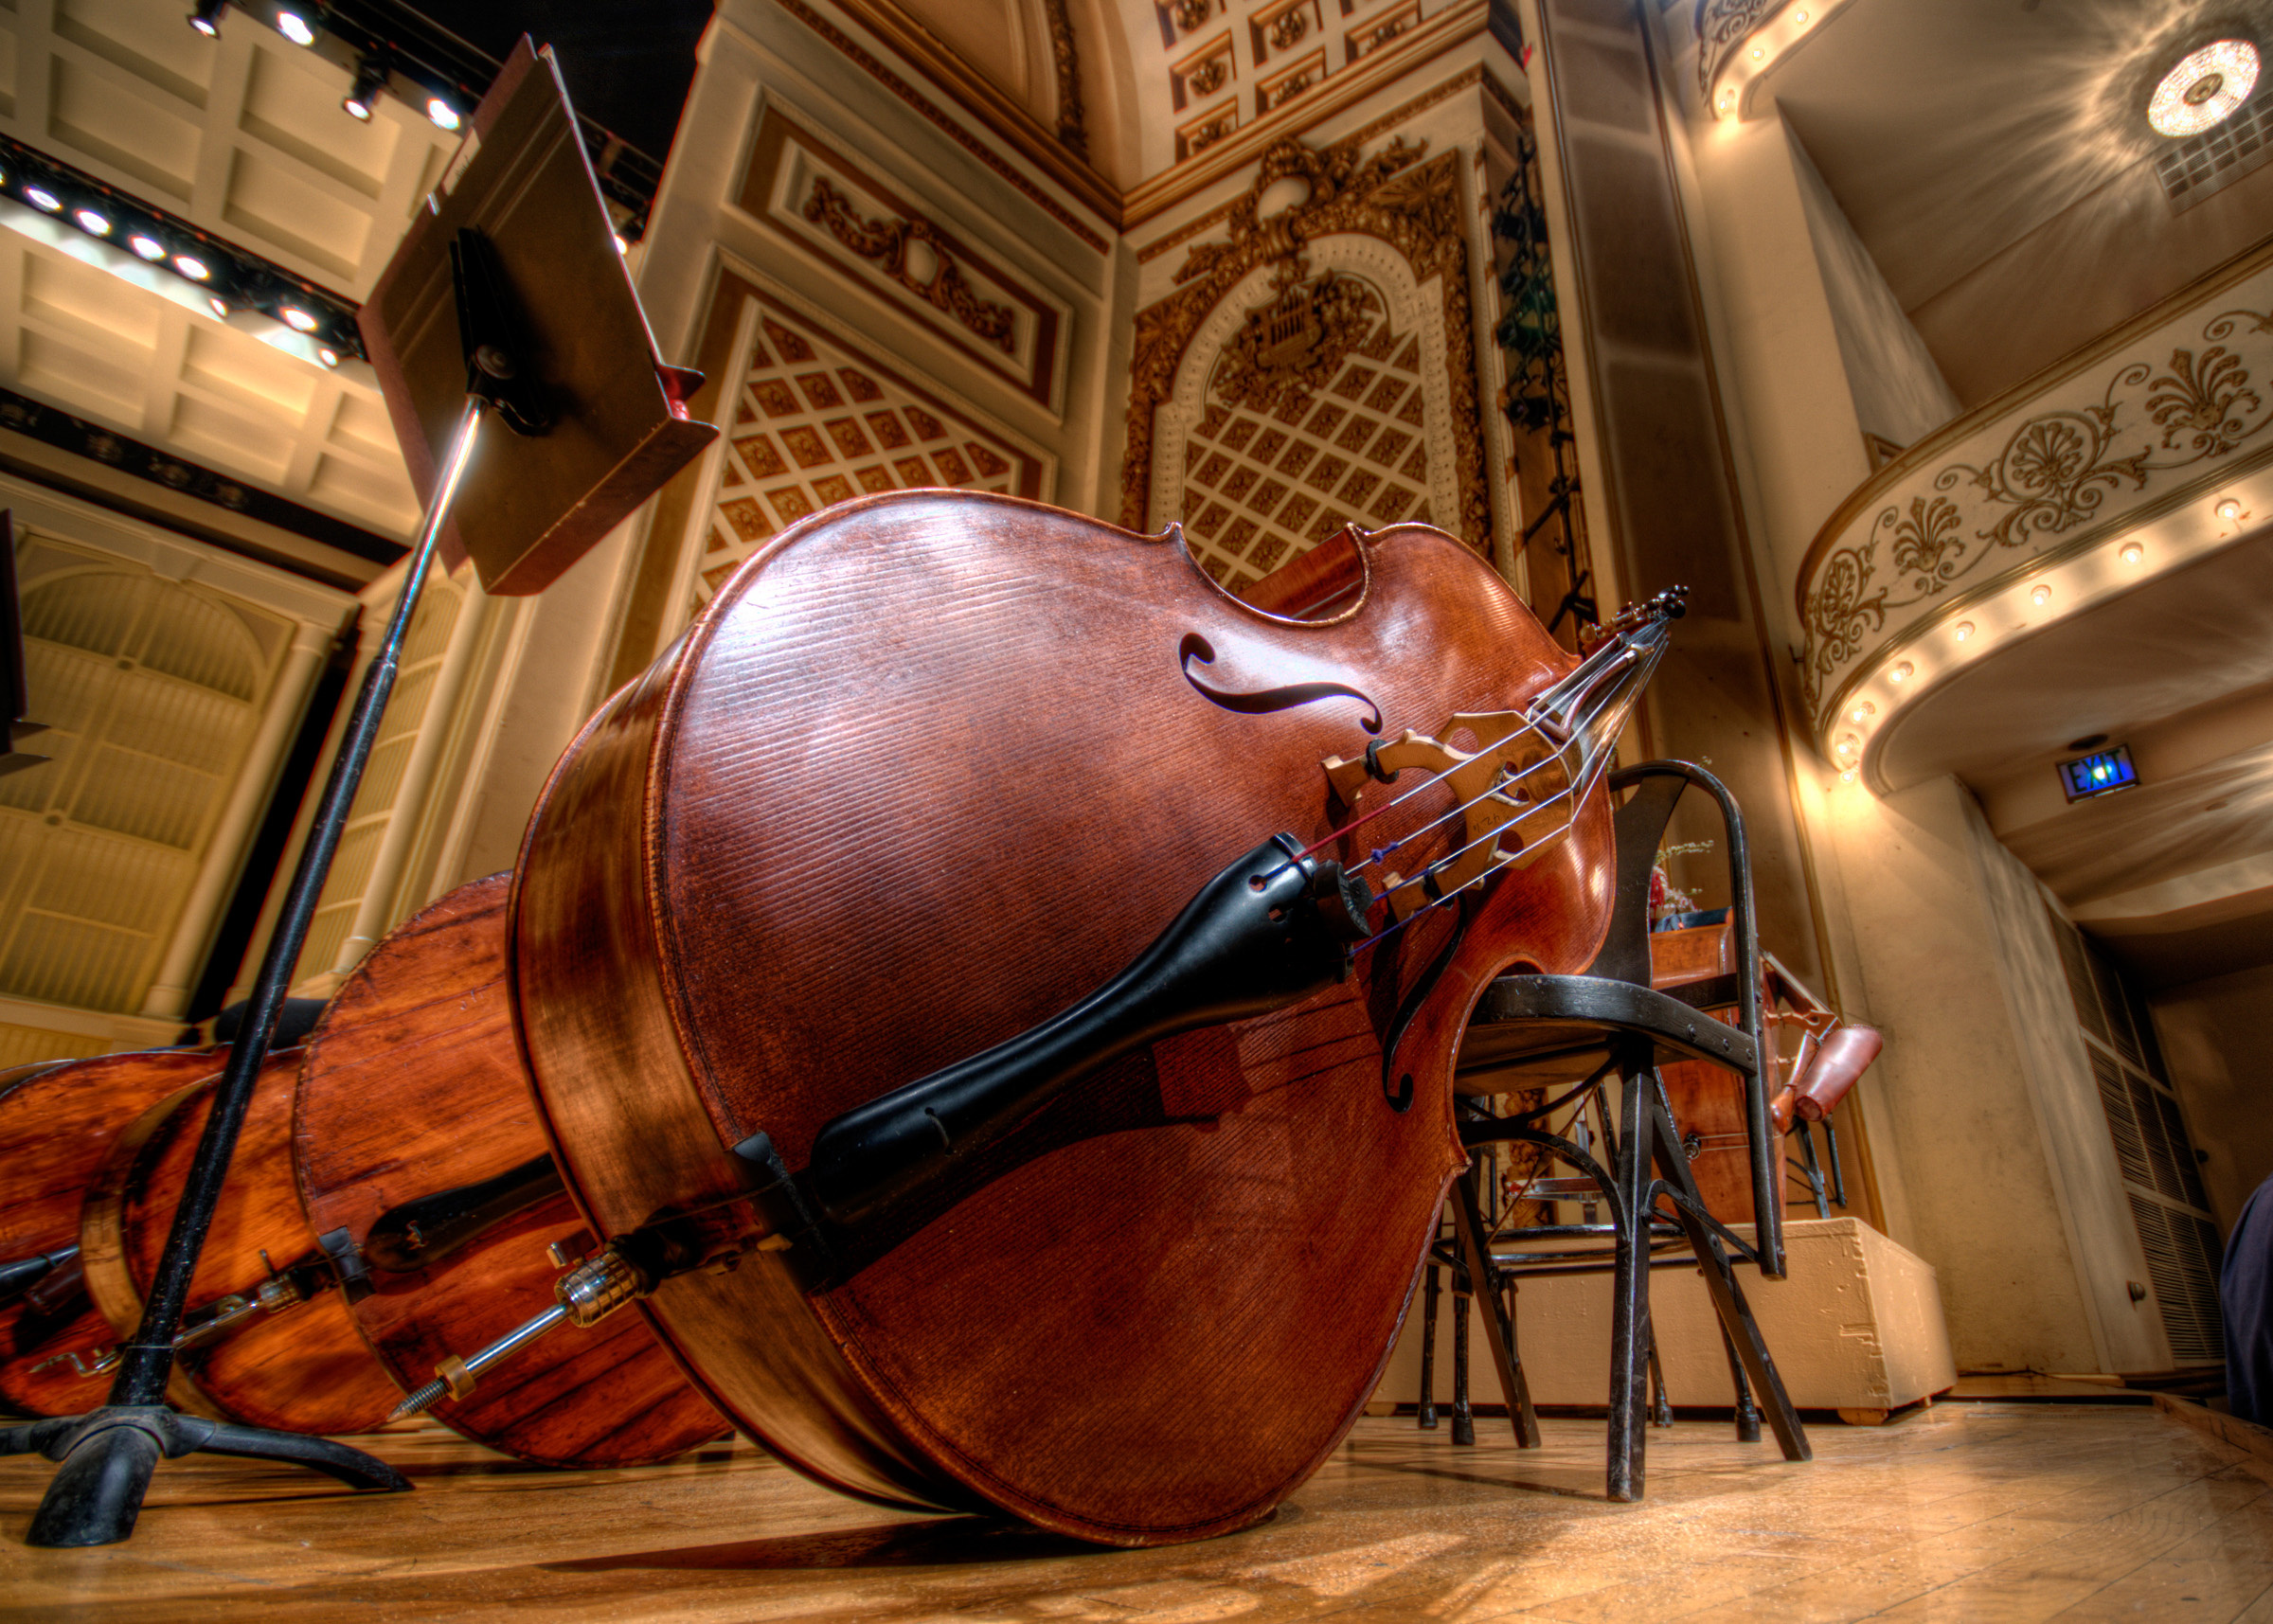 Double Bass: Bowed String Instruments, Prepared For The Concert, Close View On The Tailpiece. 2400x1720 HD Wallpaper.